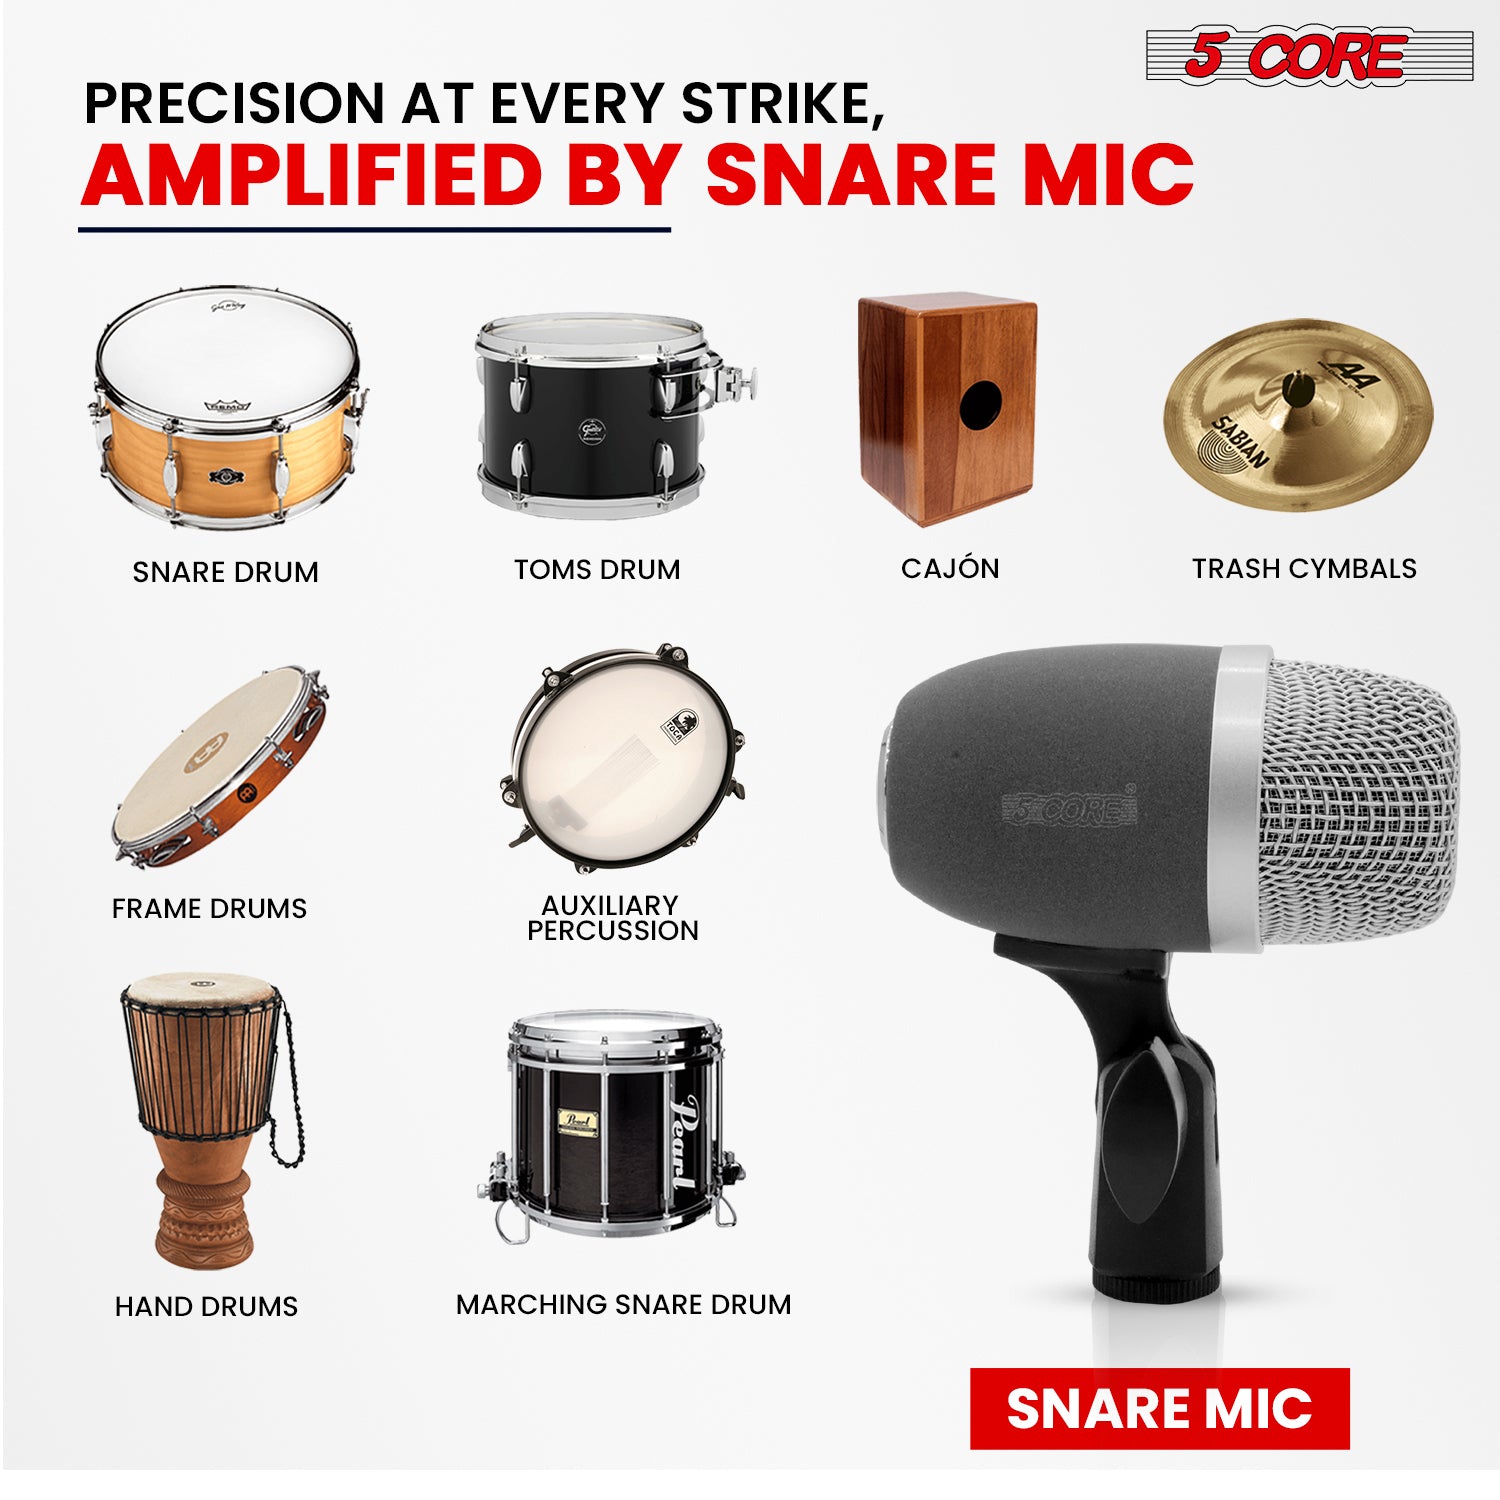 5 Core Snare Microphone XLR Wired Uni Directional Tom Drum and Other Musical Instrument Mic